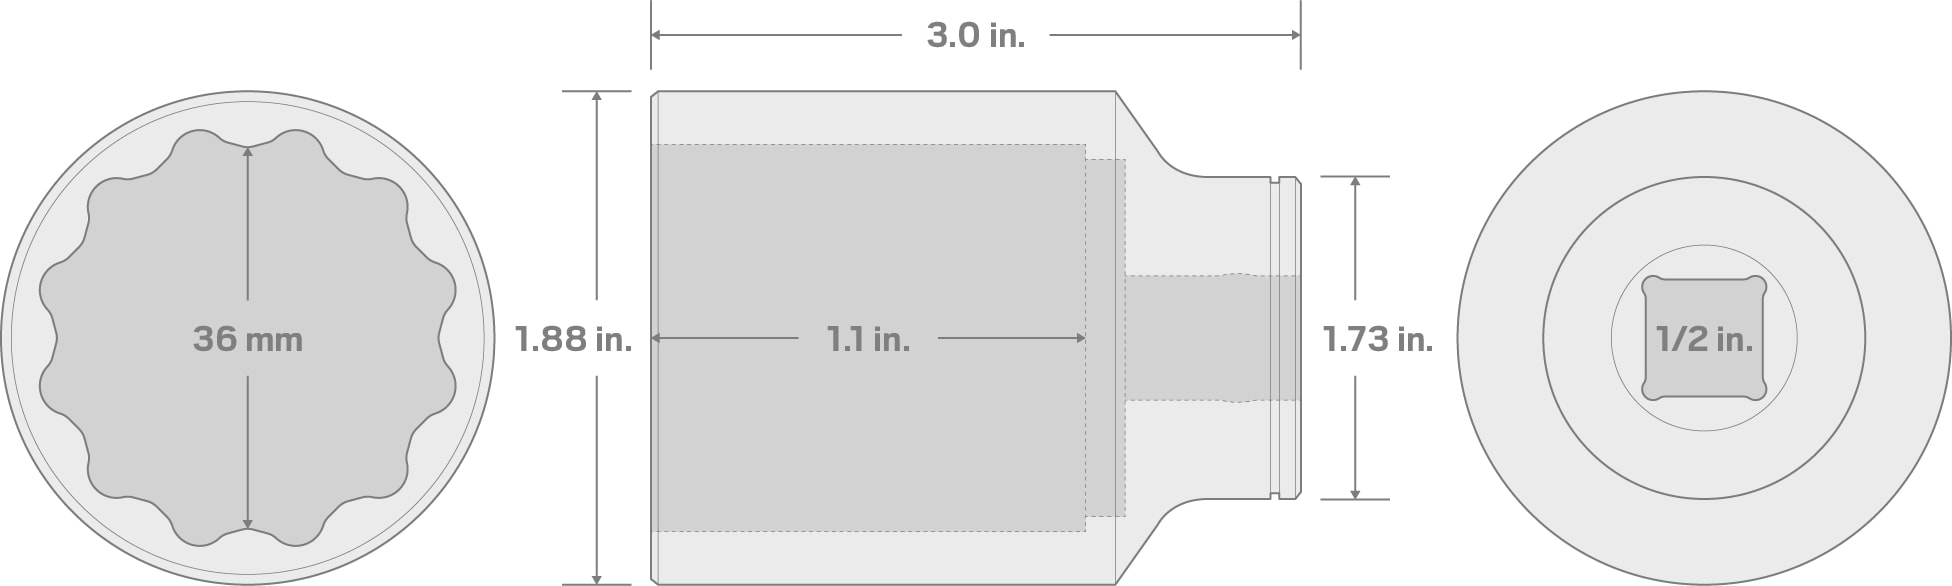 Specs for 1/2 Inch Drive x 36 mm Deep 12-Point Socket